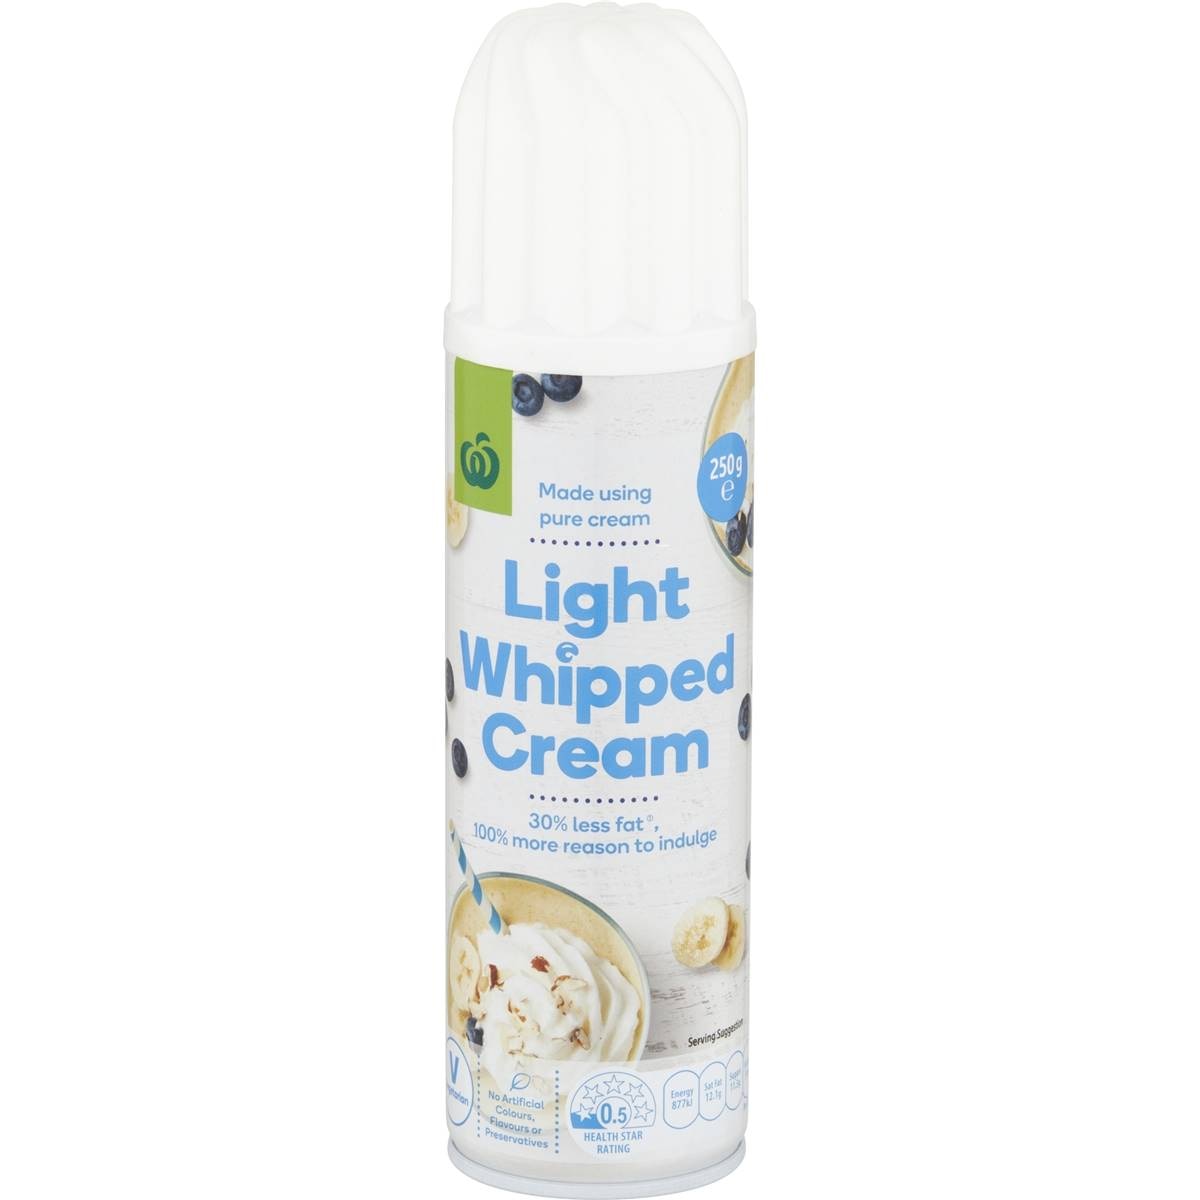 Calories in Woolworths Light Whipped Cream